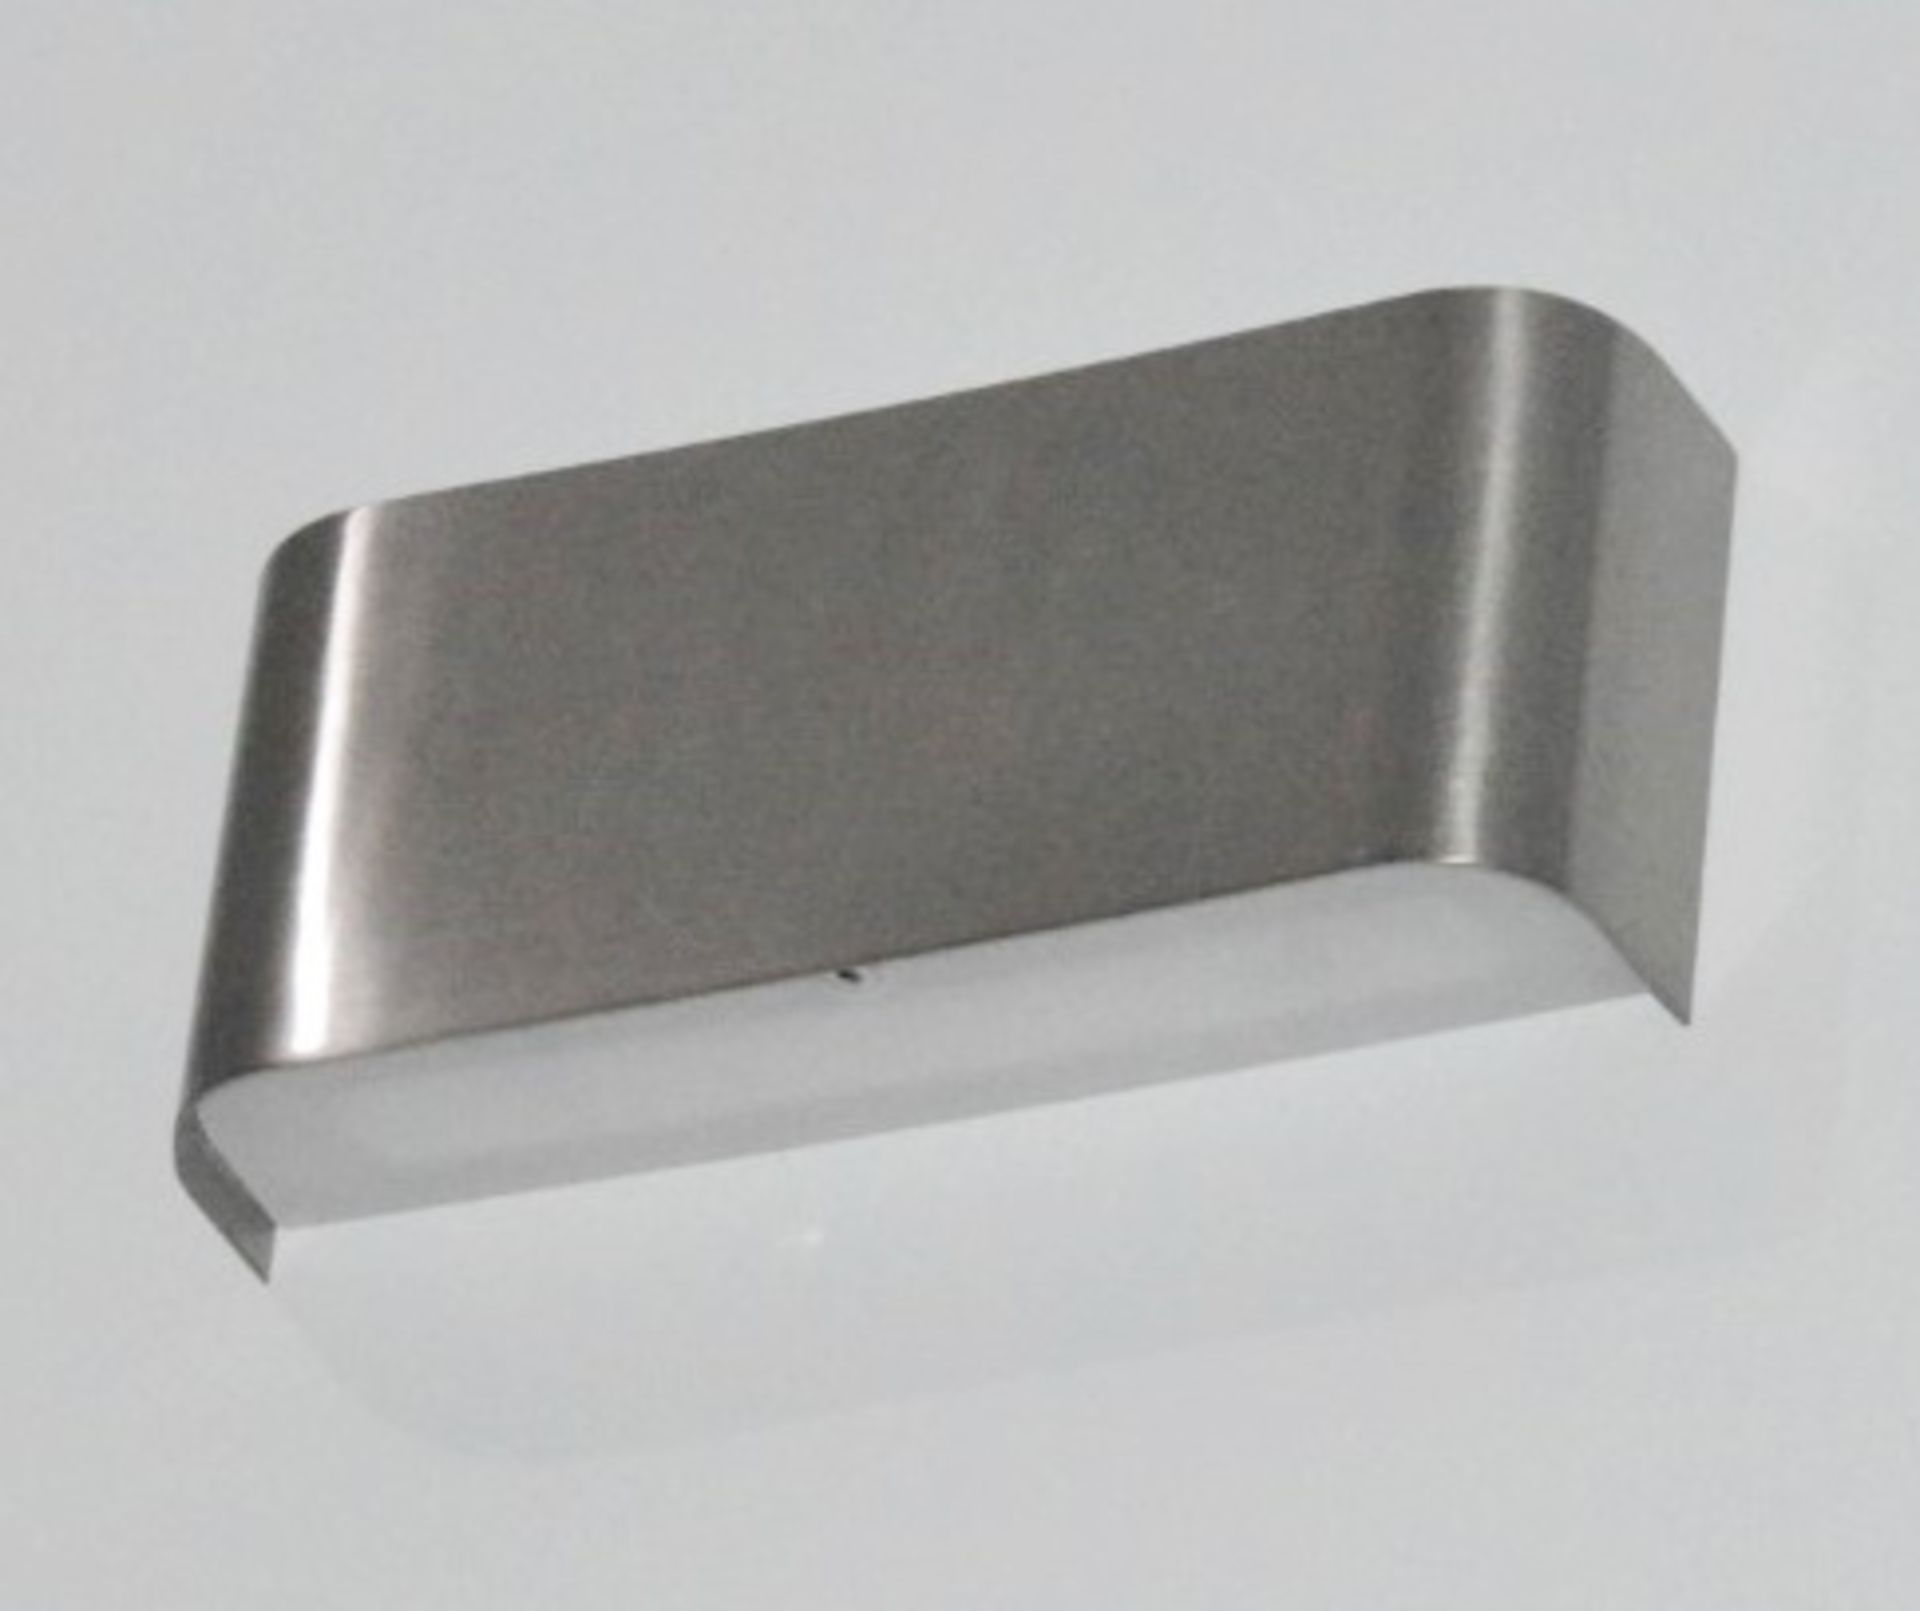 1 x Satin Silver Oblong Curved Wall Light With Up & Down 2 Light LED - RRP £96.00 - Image 3 of 3